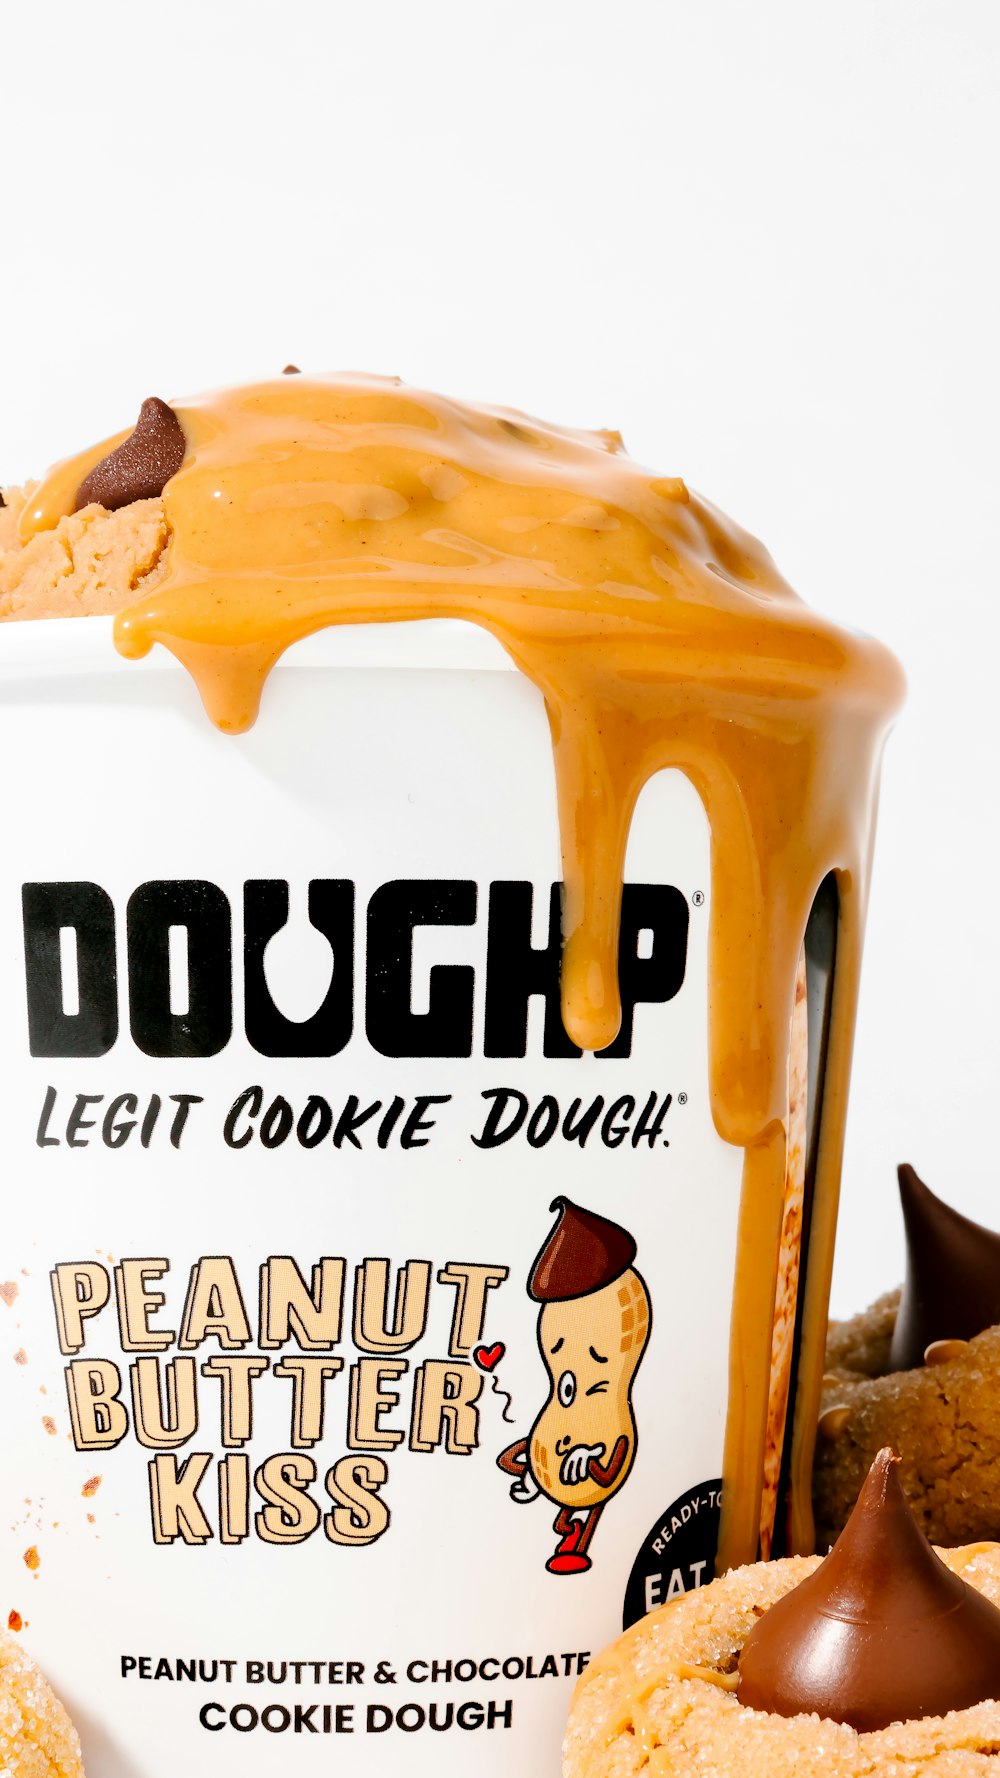 a peanut butter cookie dough is drizzled with caramel